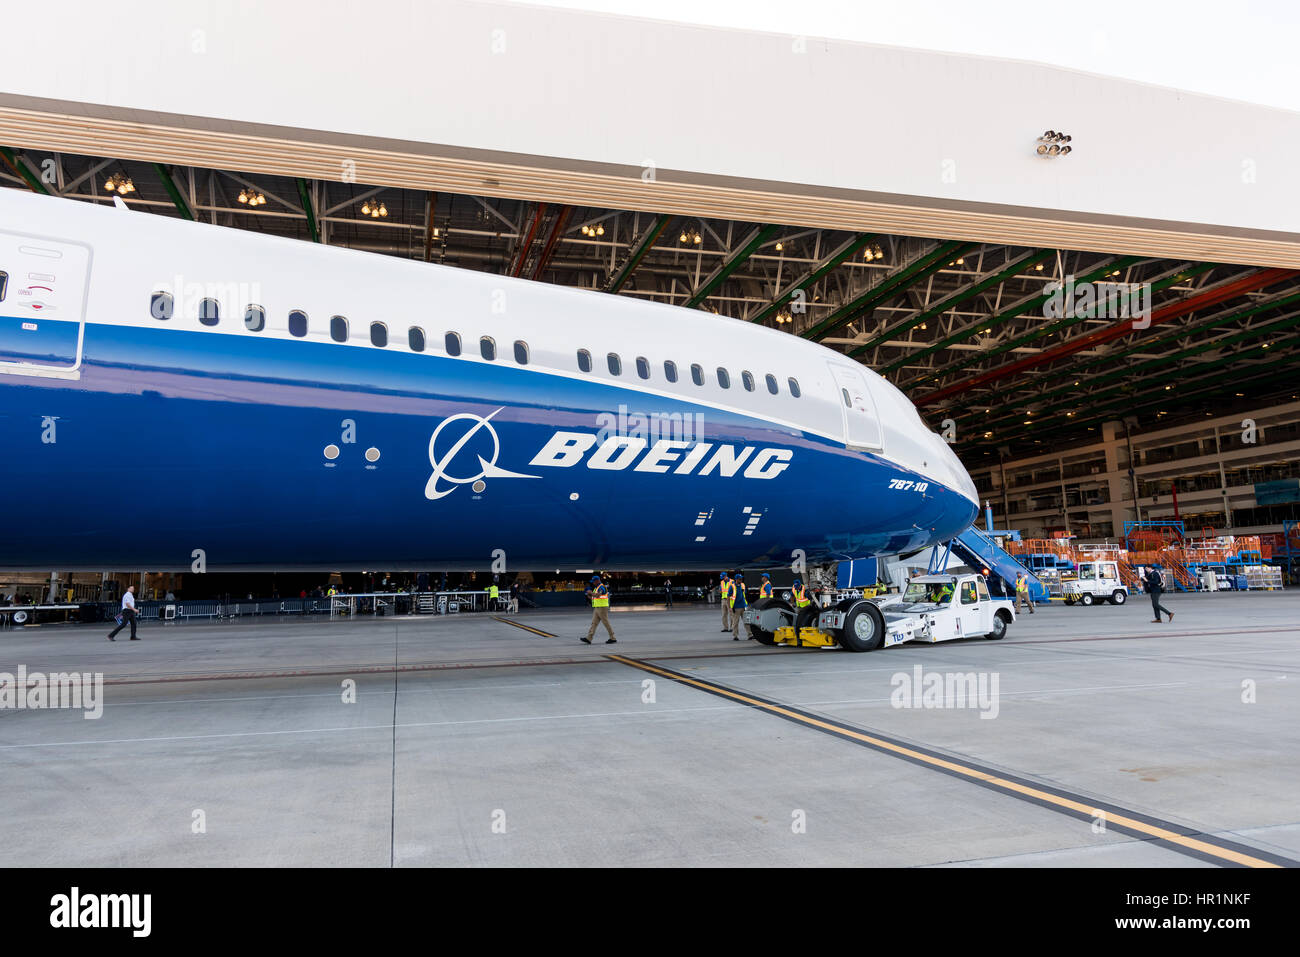 The new Boeing 787-10 Dreamliner aircraft unveiled at the Boeing factory February 17, 2016 in North Charleston, SC. President Donald Trump attended the rollout ceremony for the stretch version of the aircraft capable of carrying 330 passengers over 7,000 nautical miles. Stock Photo